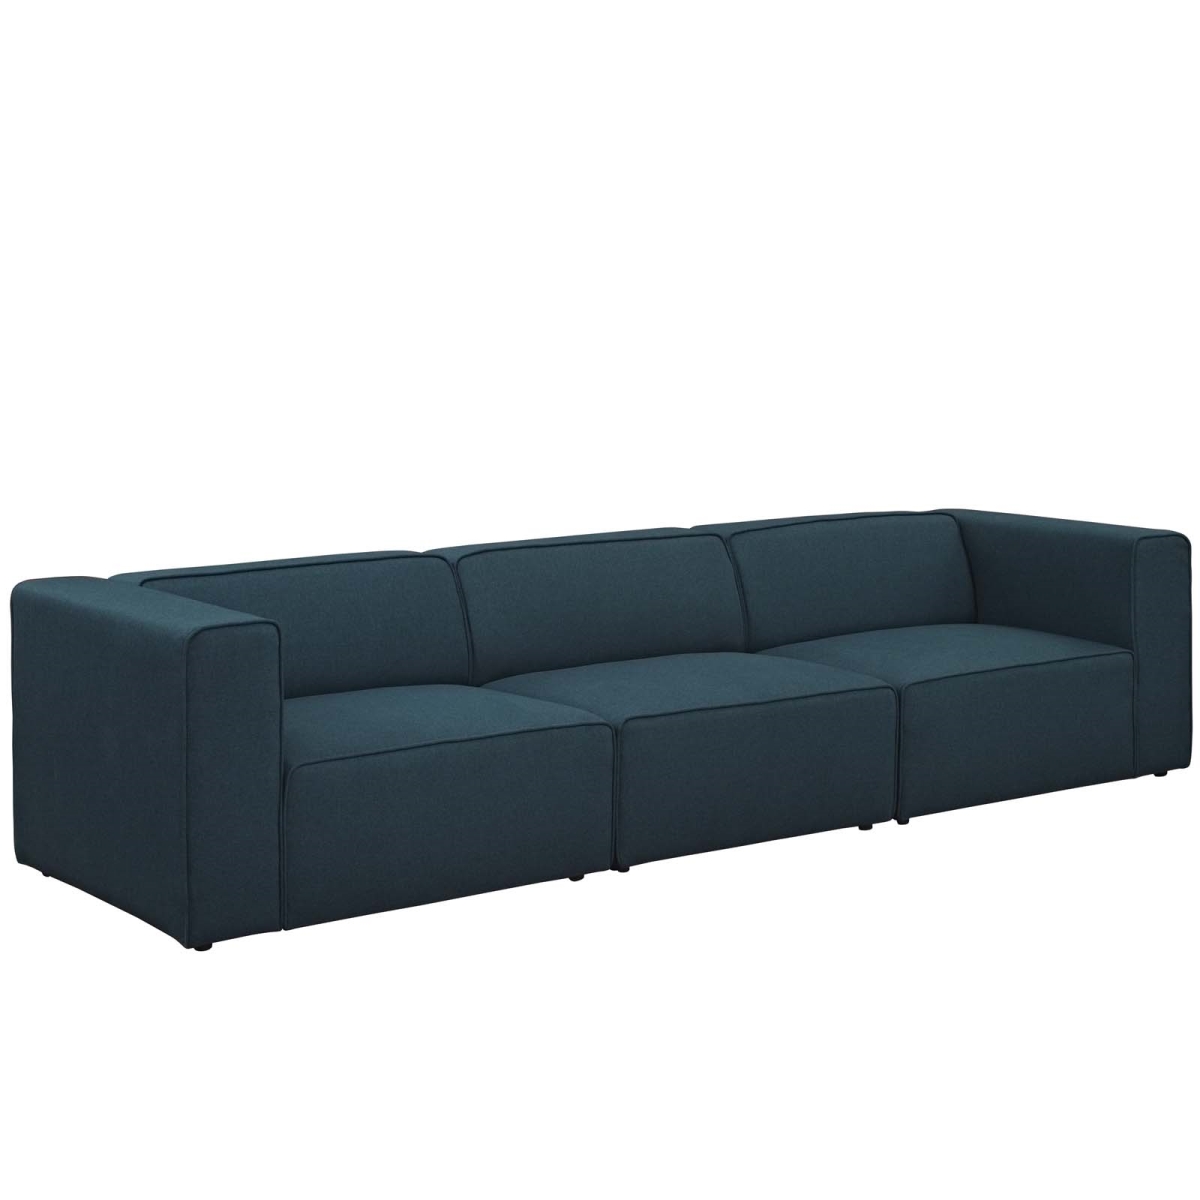 Eei-2827-blu 3 Piece Mingle Upholstered Fabric Sectional Sofa Set - Blue, 27 X 121.5 X 37 In.